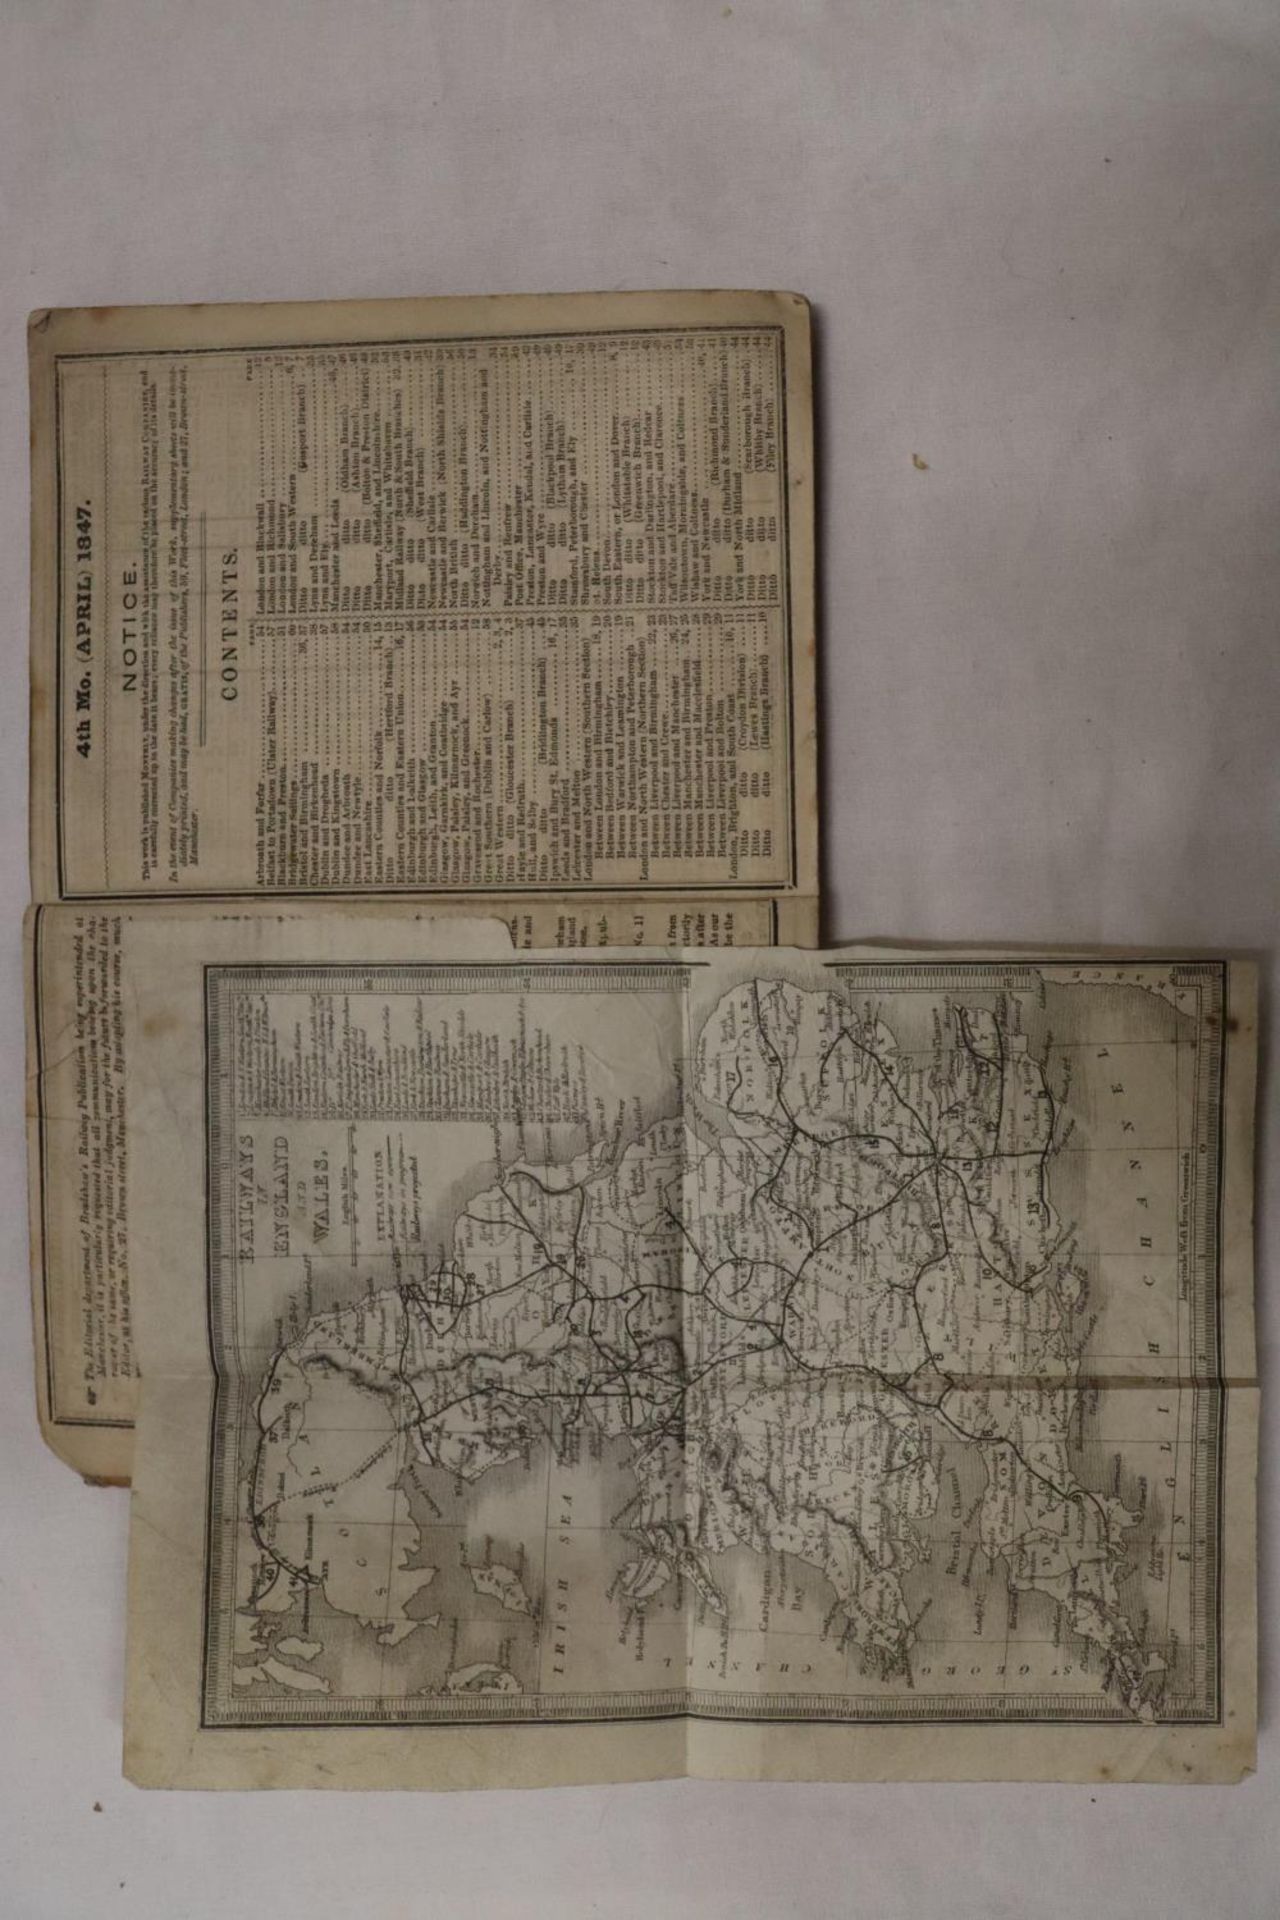 A BRADSHAWS MONTHLY RAILWAY GUIDE DATED APRIL 1847, PAPERBACK VERSION AND A FOLD OUT RAILWAY MAP - Bild 2 aus 4